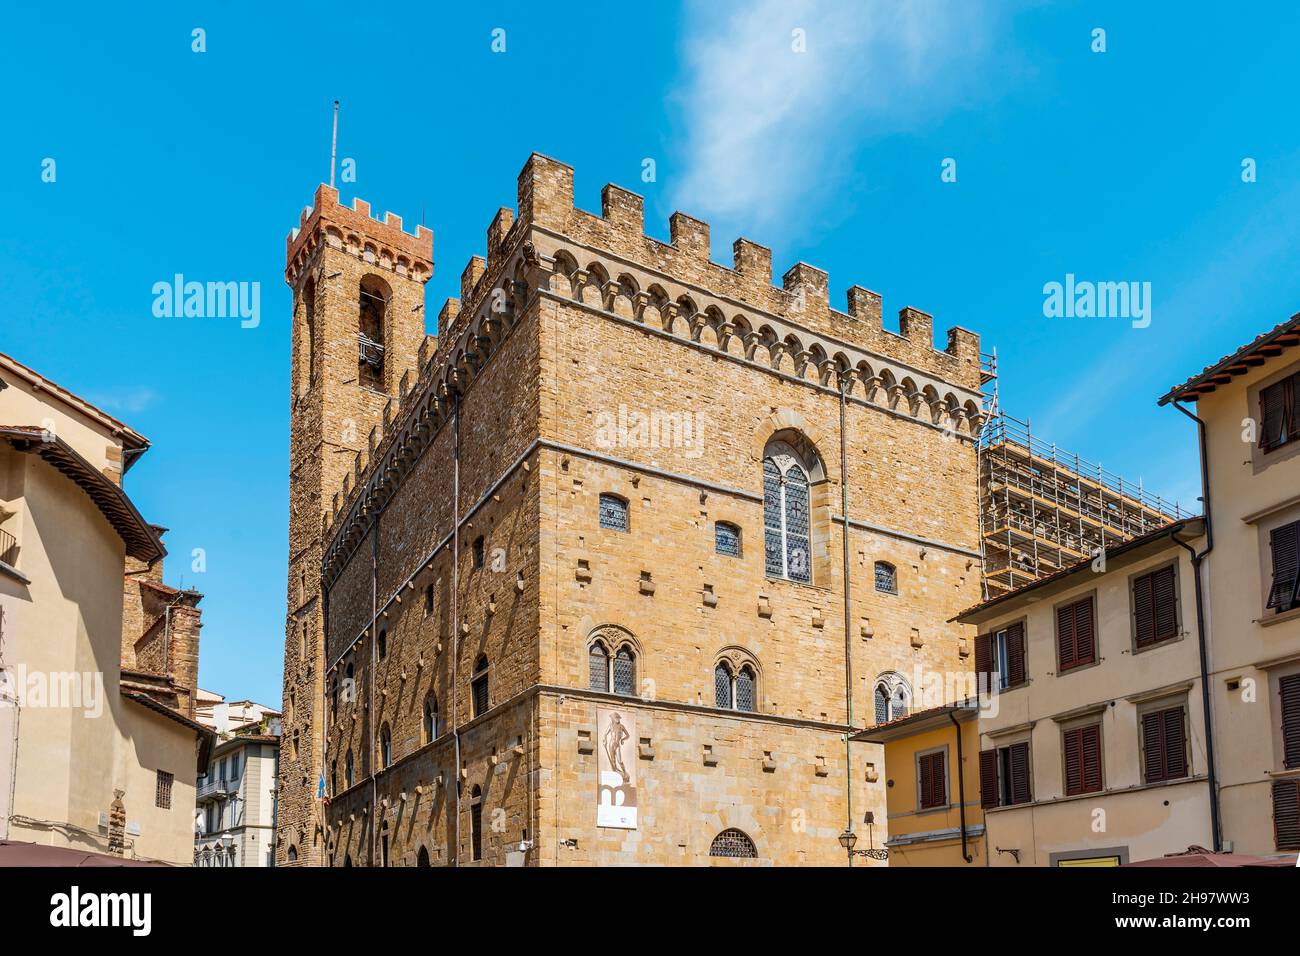 The Bargello palace, built in the 13th century as house of the Podestà, then barrack and prison, now a museum focused on Renaissance art, in Florence, Stock Photo